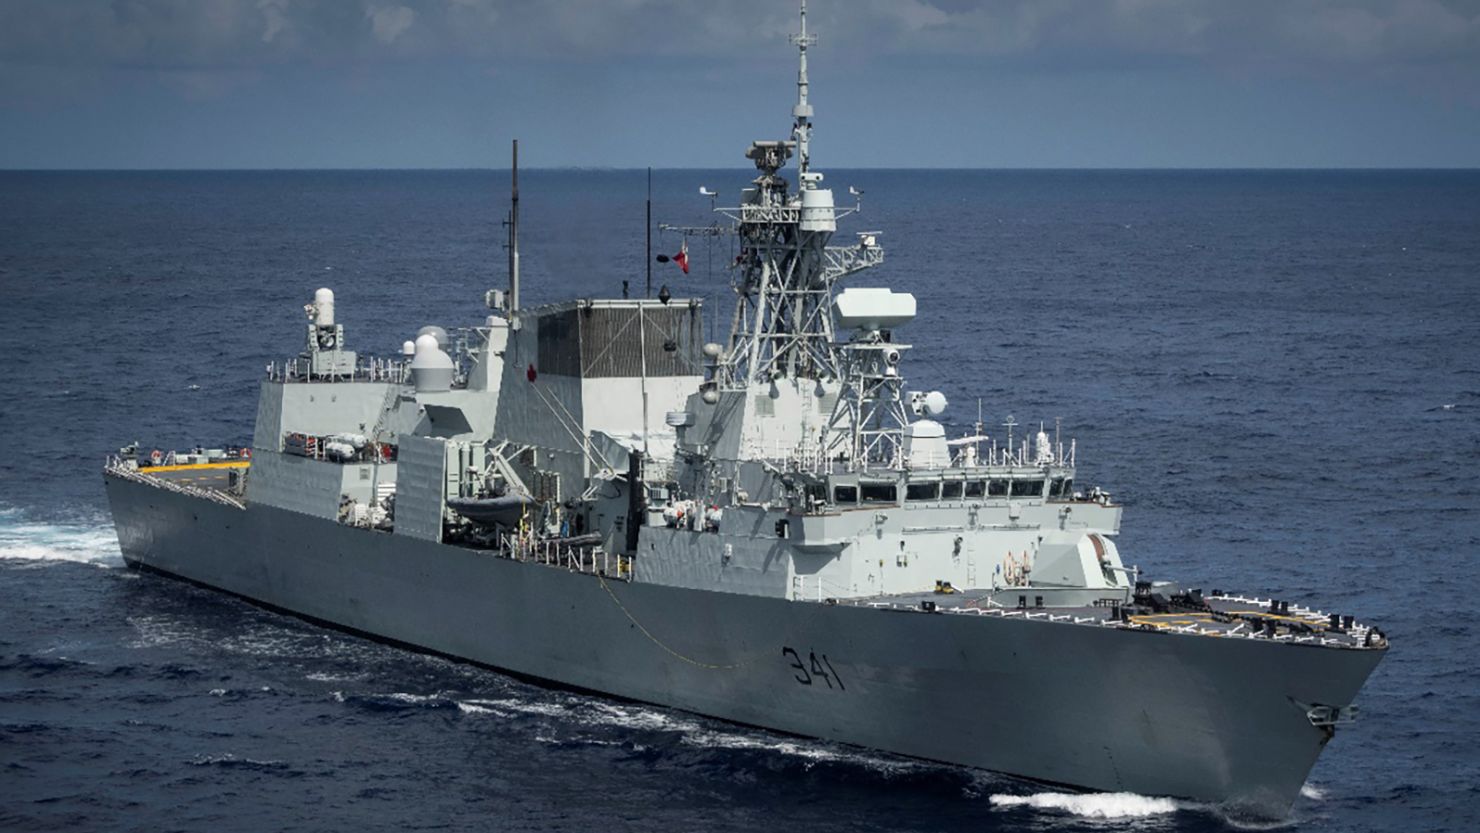 The HMCS Ottawa has been making its way through the South China Sea.